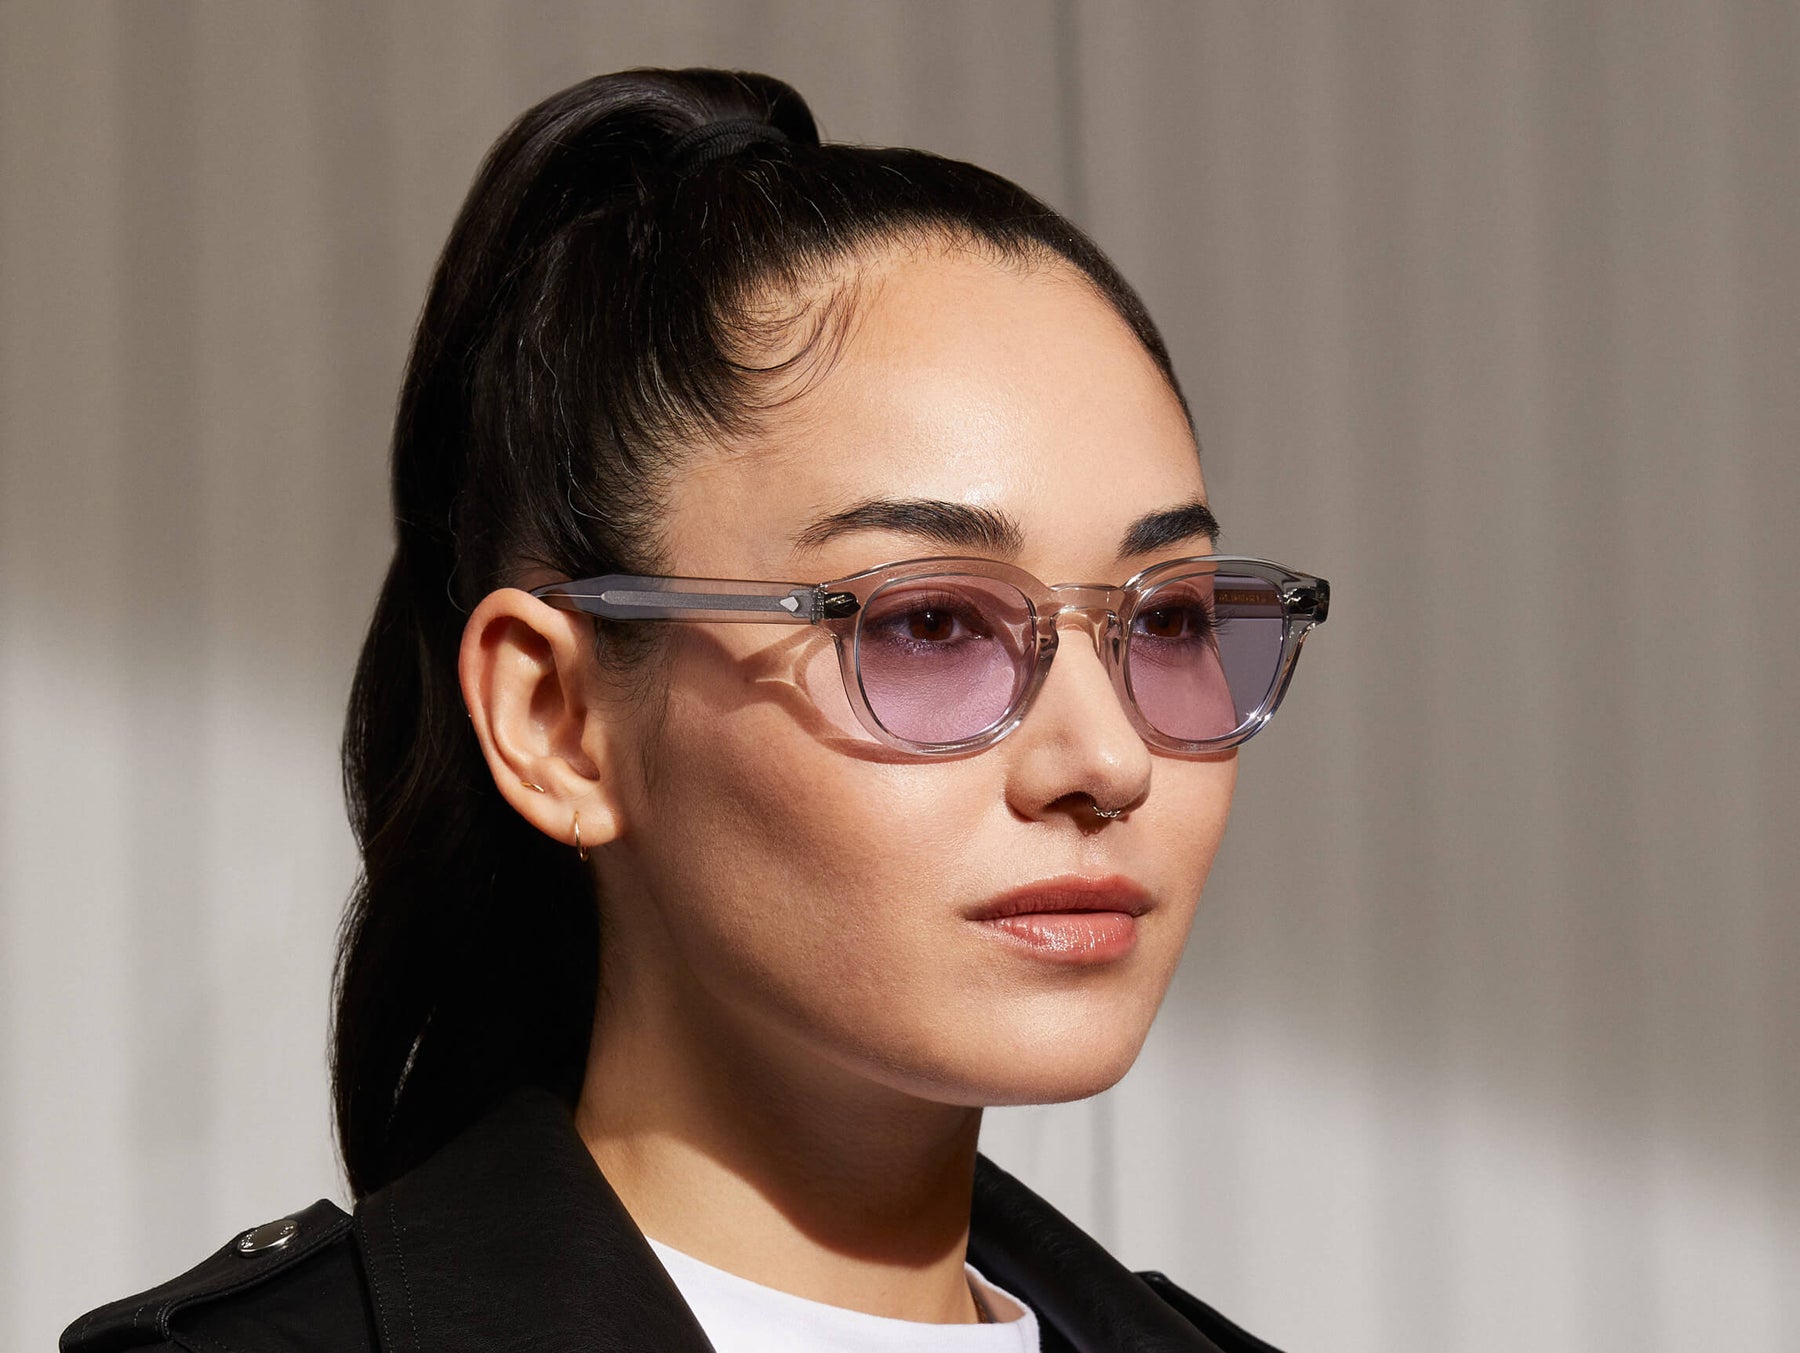 Model is wearing The LEMTOSH in Light Grey in size 46 with Lavender Tinted Lenses